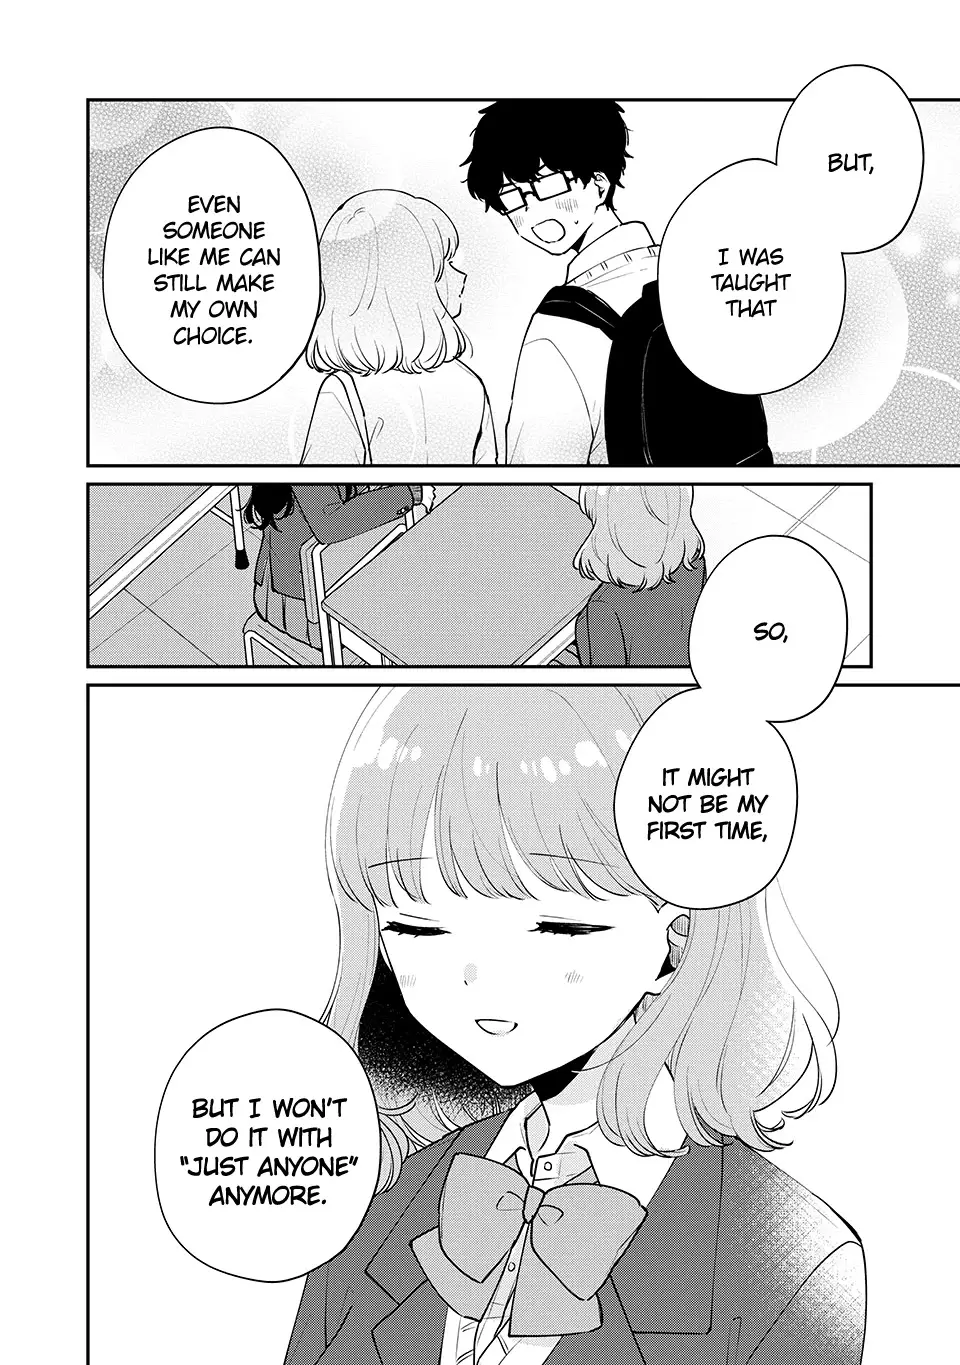 It's Not Meguro-San's First Time - 52 page 9